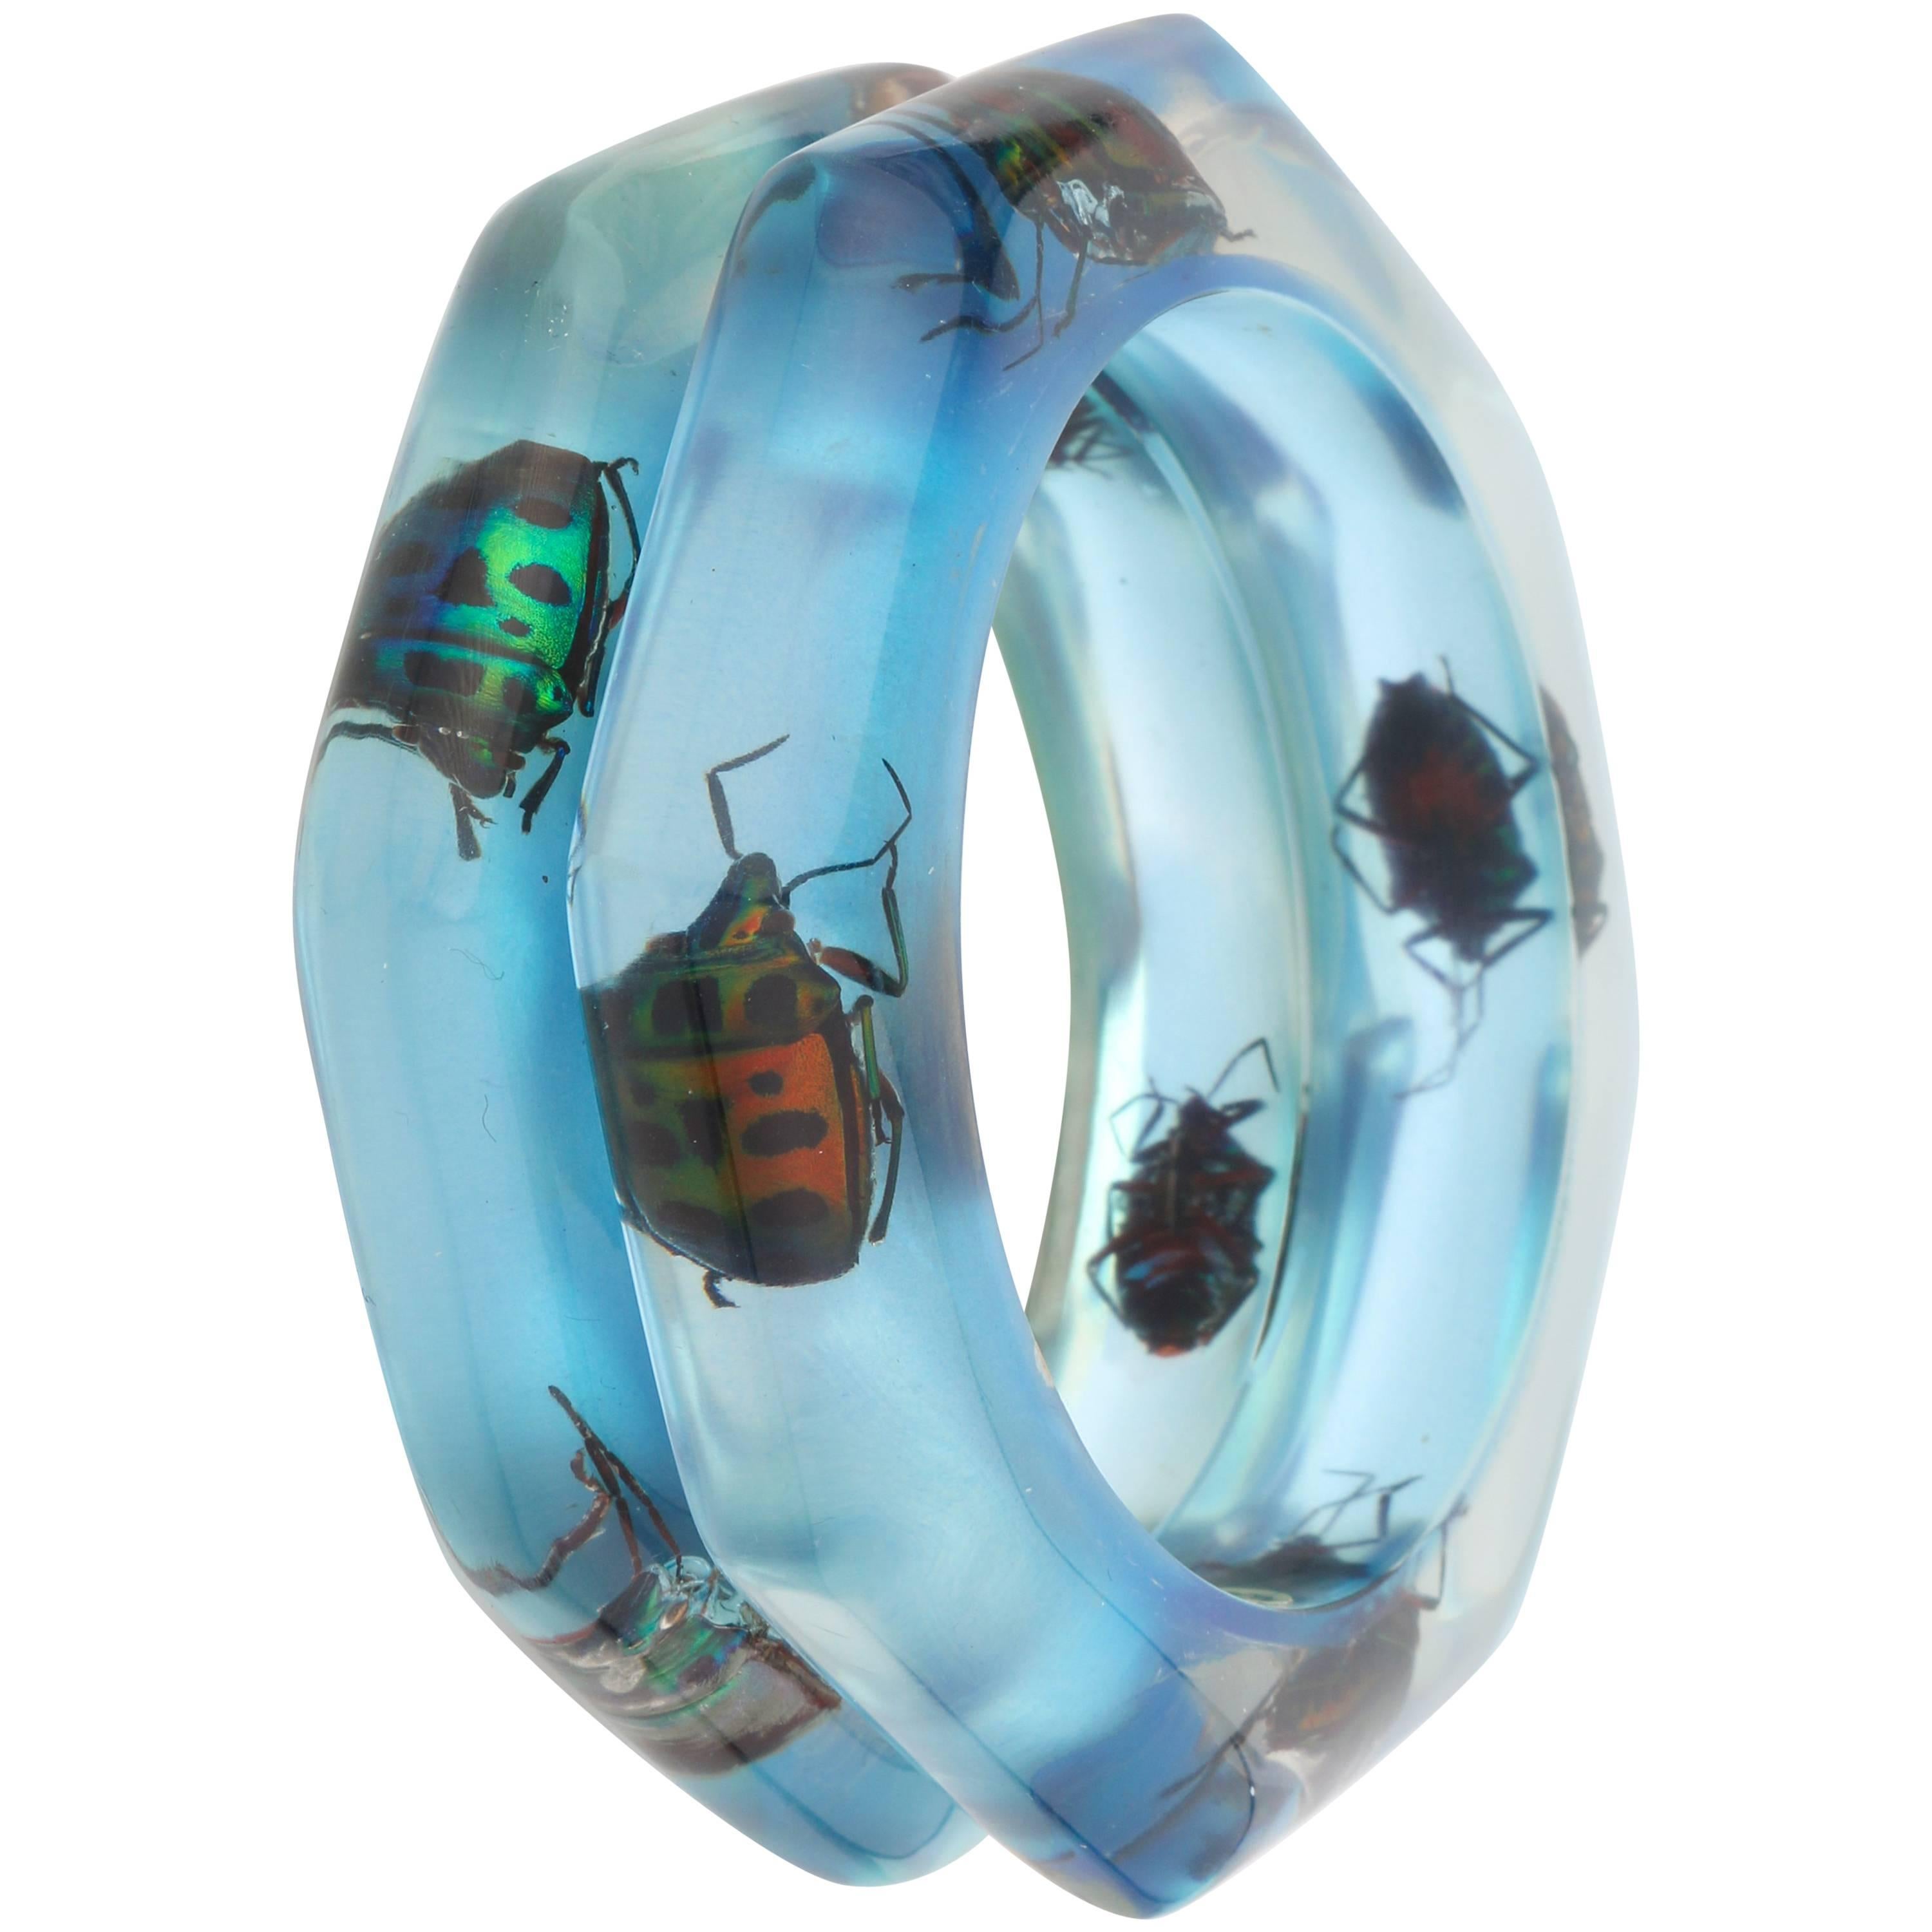 Authentic 1960's Lucite Bracelet with Beetle Inclusions